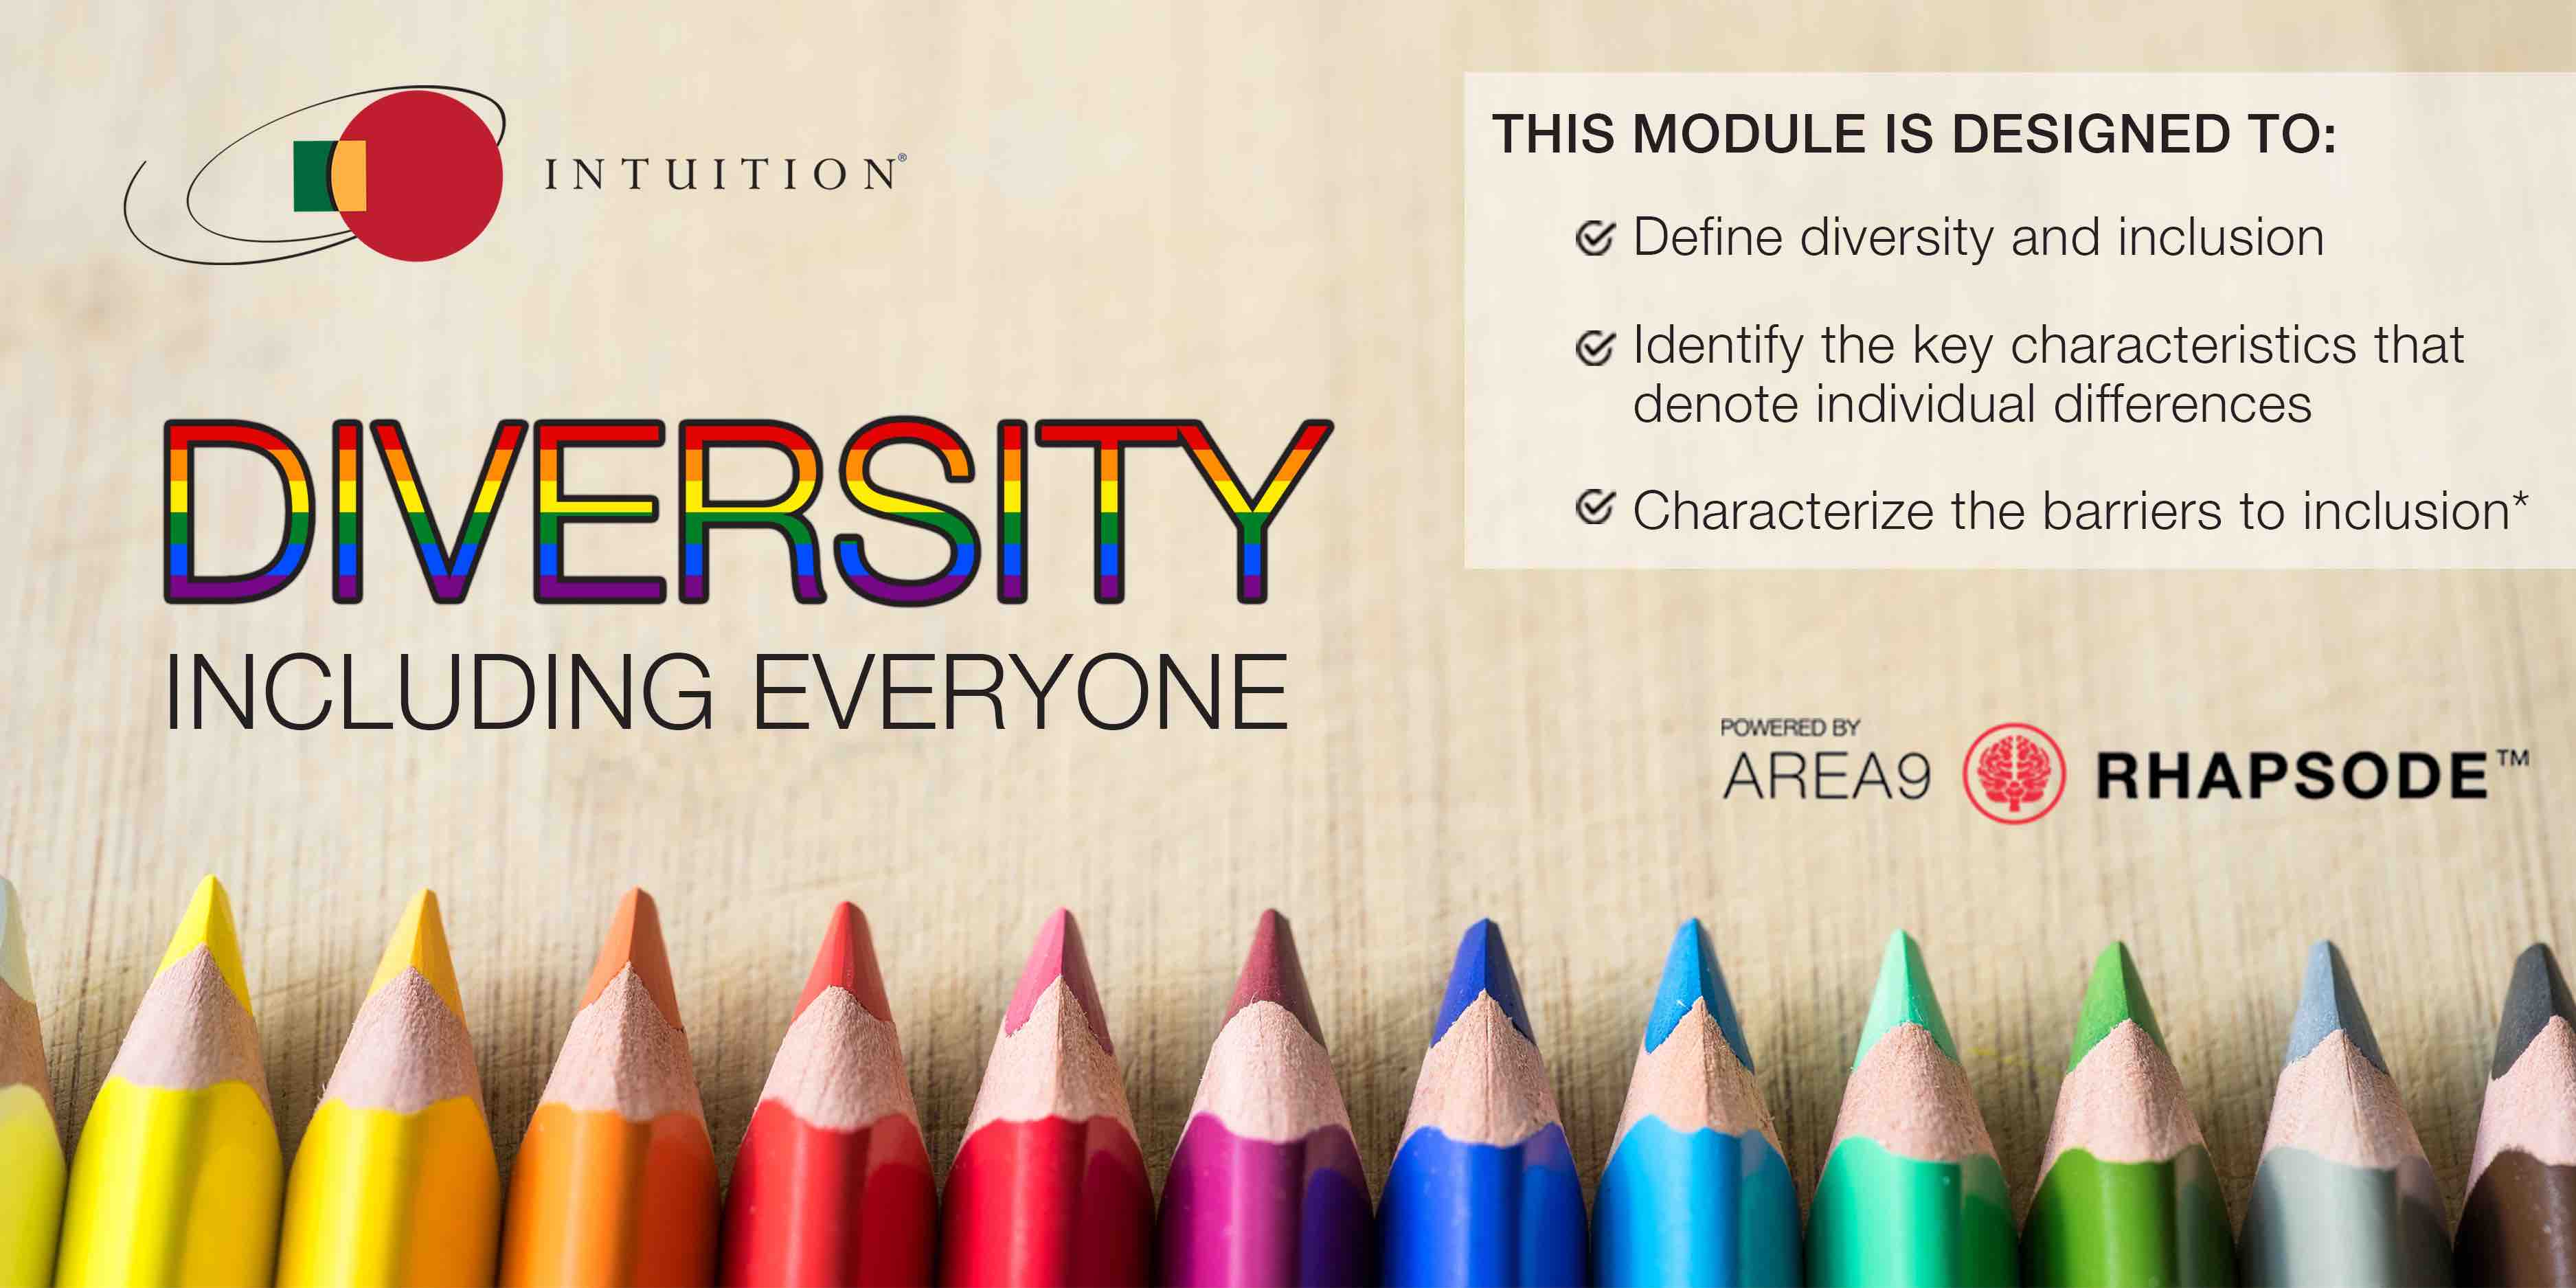 Diversity Course Intuition Area9 Lyceum Banner: In this adaptive learning module you will learn about: Defining diversity and inclusion, Identifying the key characteristics that denote individual differences and Characterizing the barriers to inclusion. Developed in partnership with Intuition powered by Area9 Rhapsode